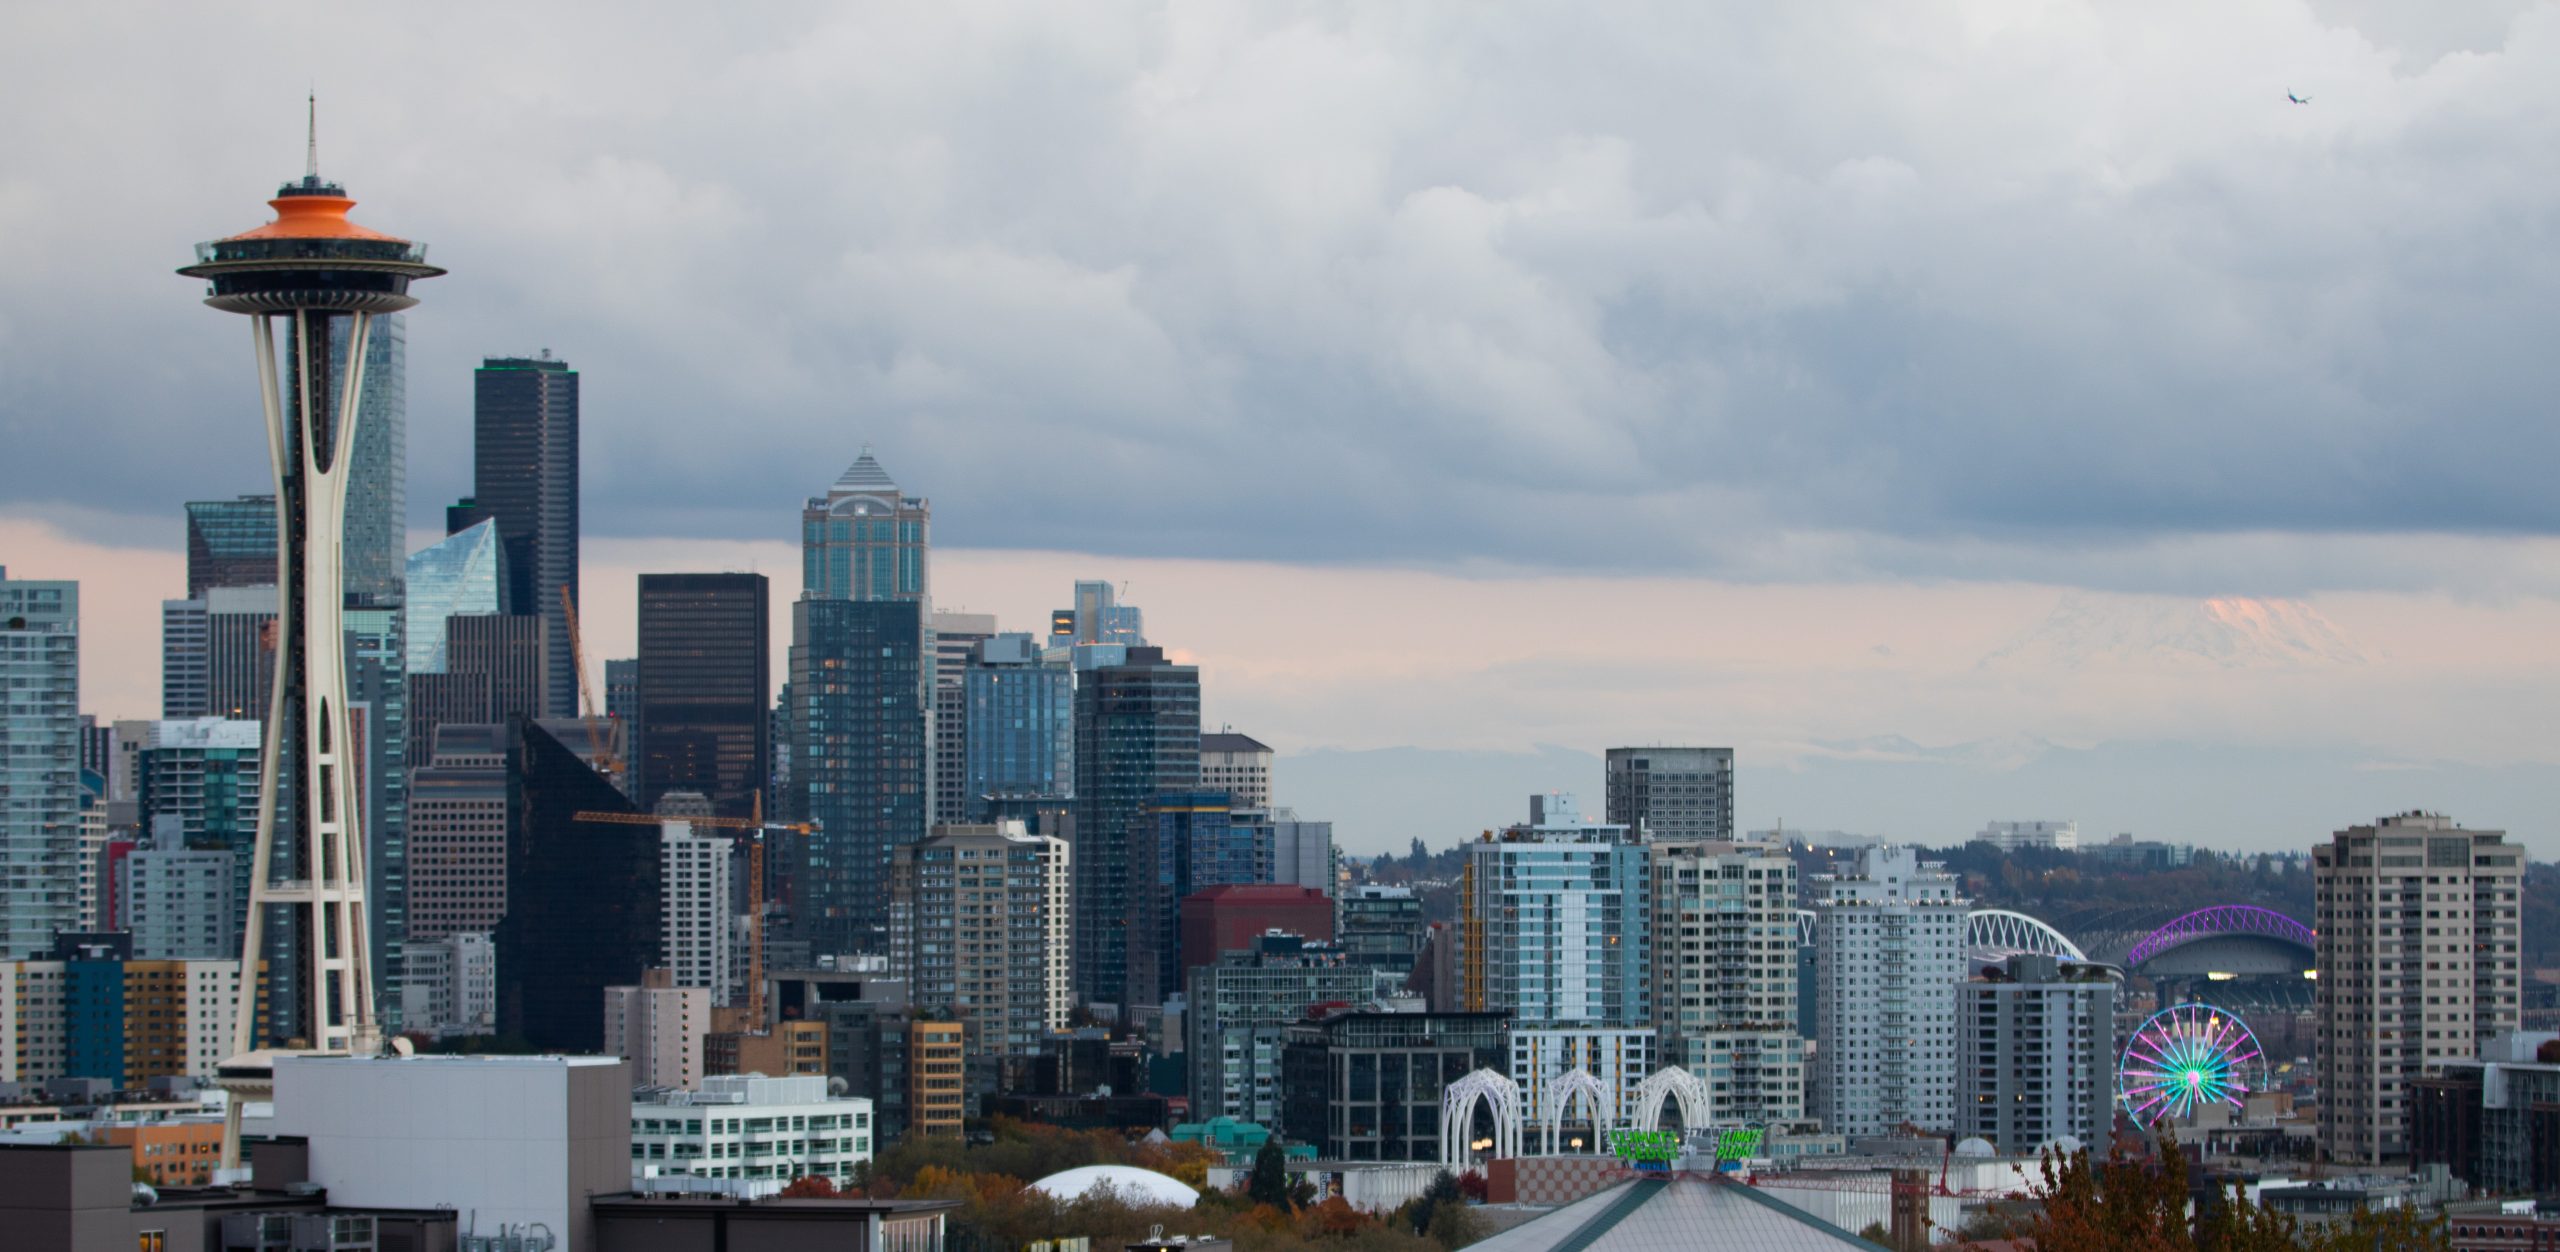 Seattle cityscape with Space Needle, Climate Pledge Arena and the wheel